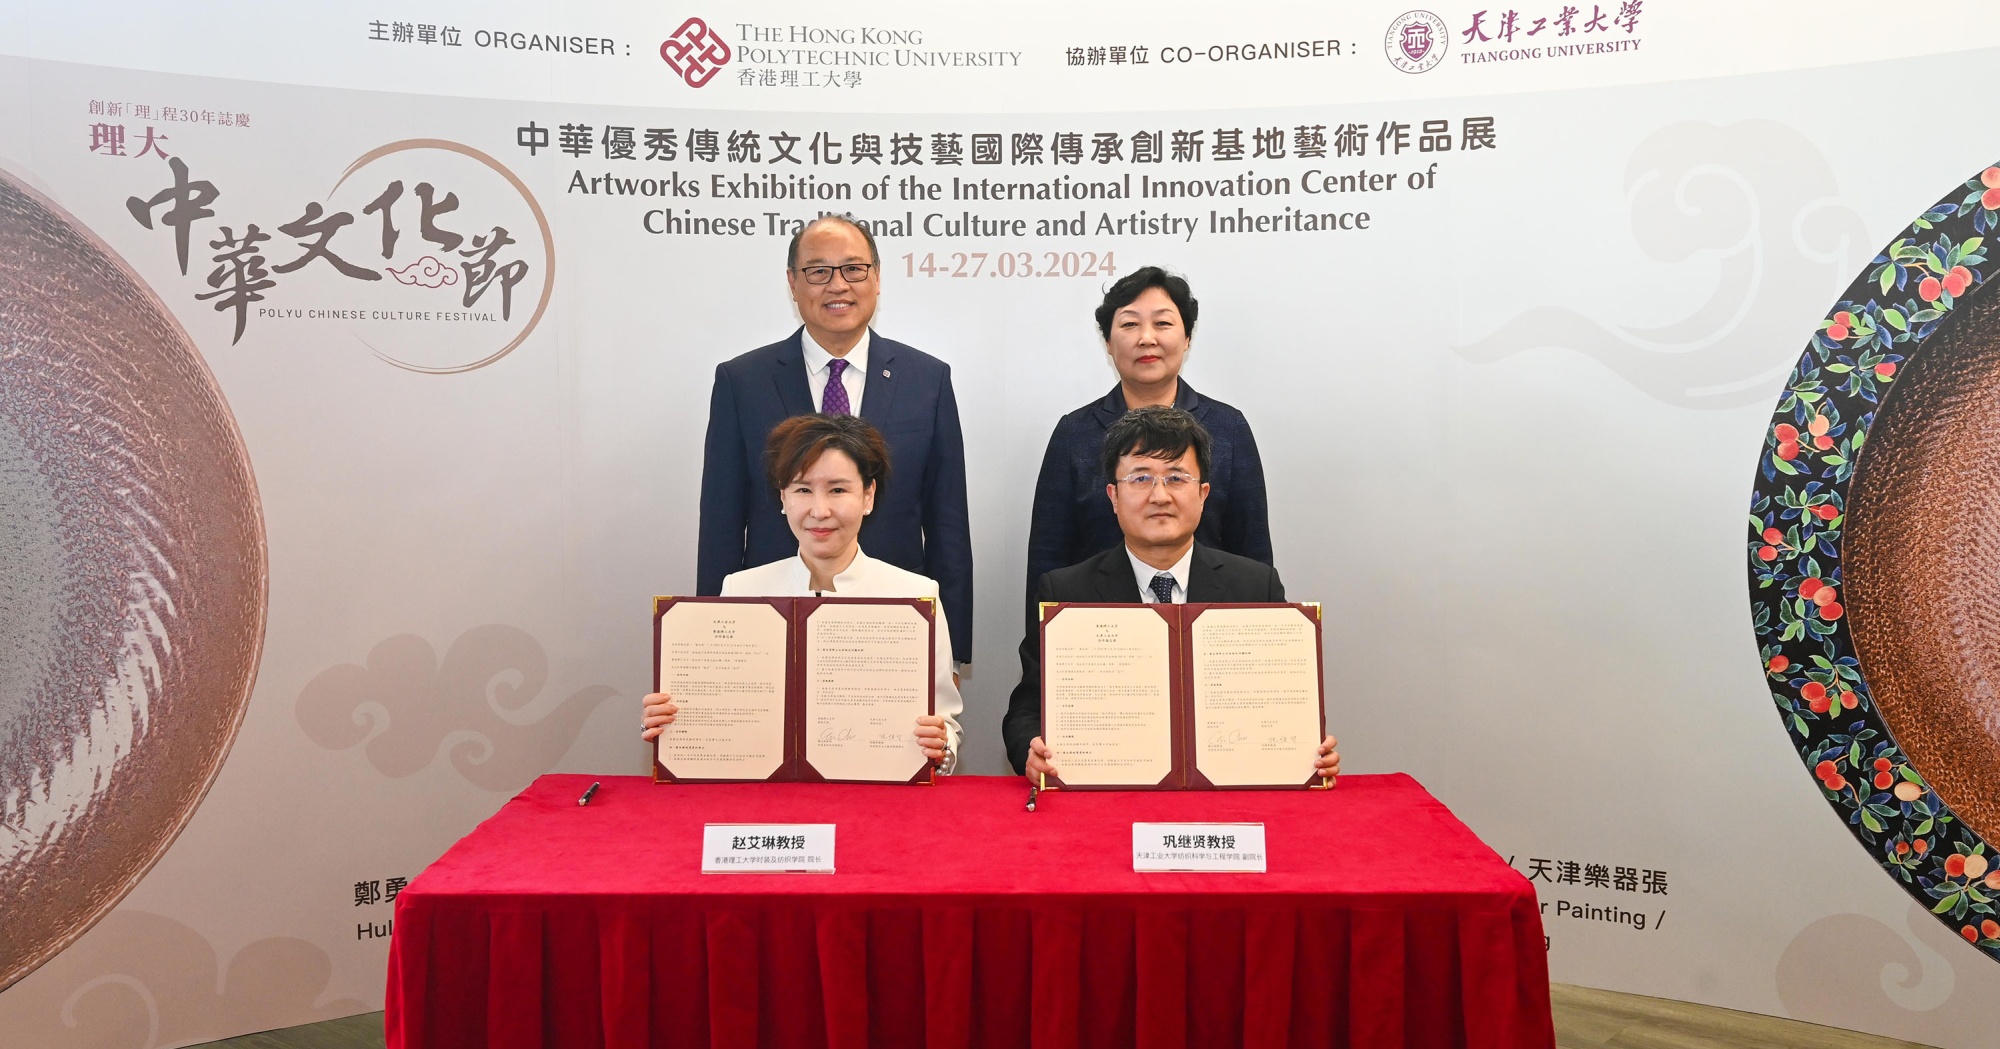 Witnessed by Dr Lam Tai-fai, PolyU Council Chairman (back row, left); and Ms Shen Jiang, Secretary of the Party Committee at Tiangong University (back row, right), the MoU was signed by Prof. Erin Cho, Dean of the School of Fashion and Textiles of PolyU (front row, left); and Prof. Gong Jixian, Associate Dean of the School of Textile Science and Engineering of Tiangong University (front row, right), to reinforce academic exchange and collaboration on scientific research projects.